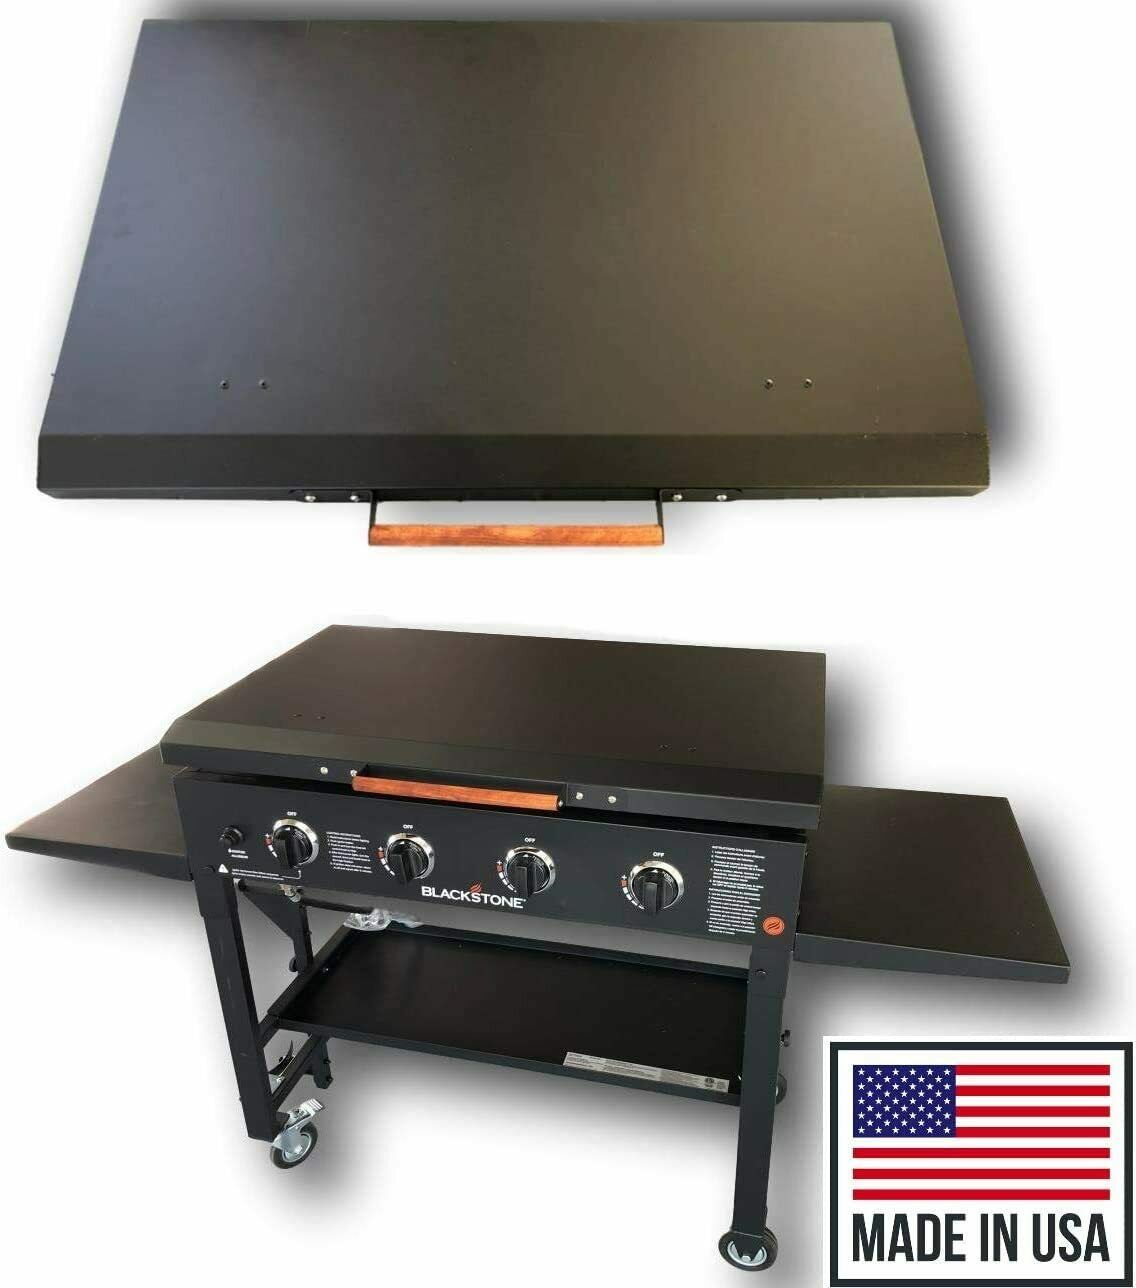 Black Aluminum Lid Storage Cover For 36" Blackstone Griddle - Made In Usa